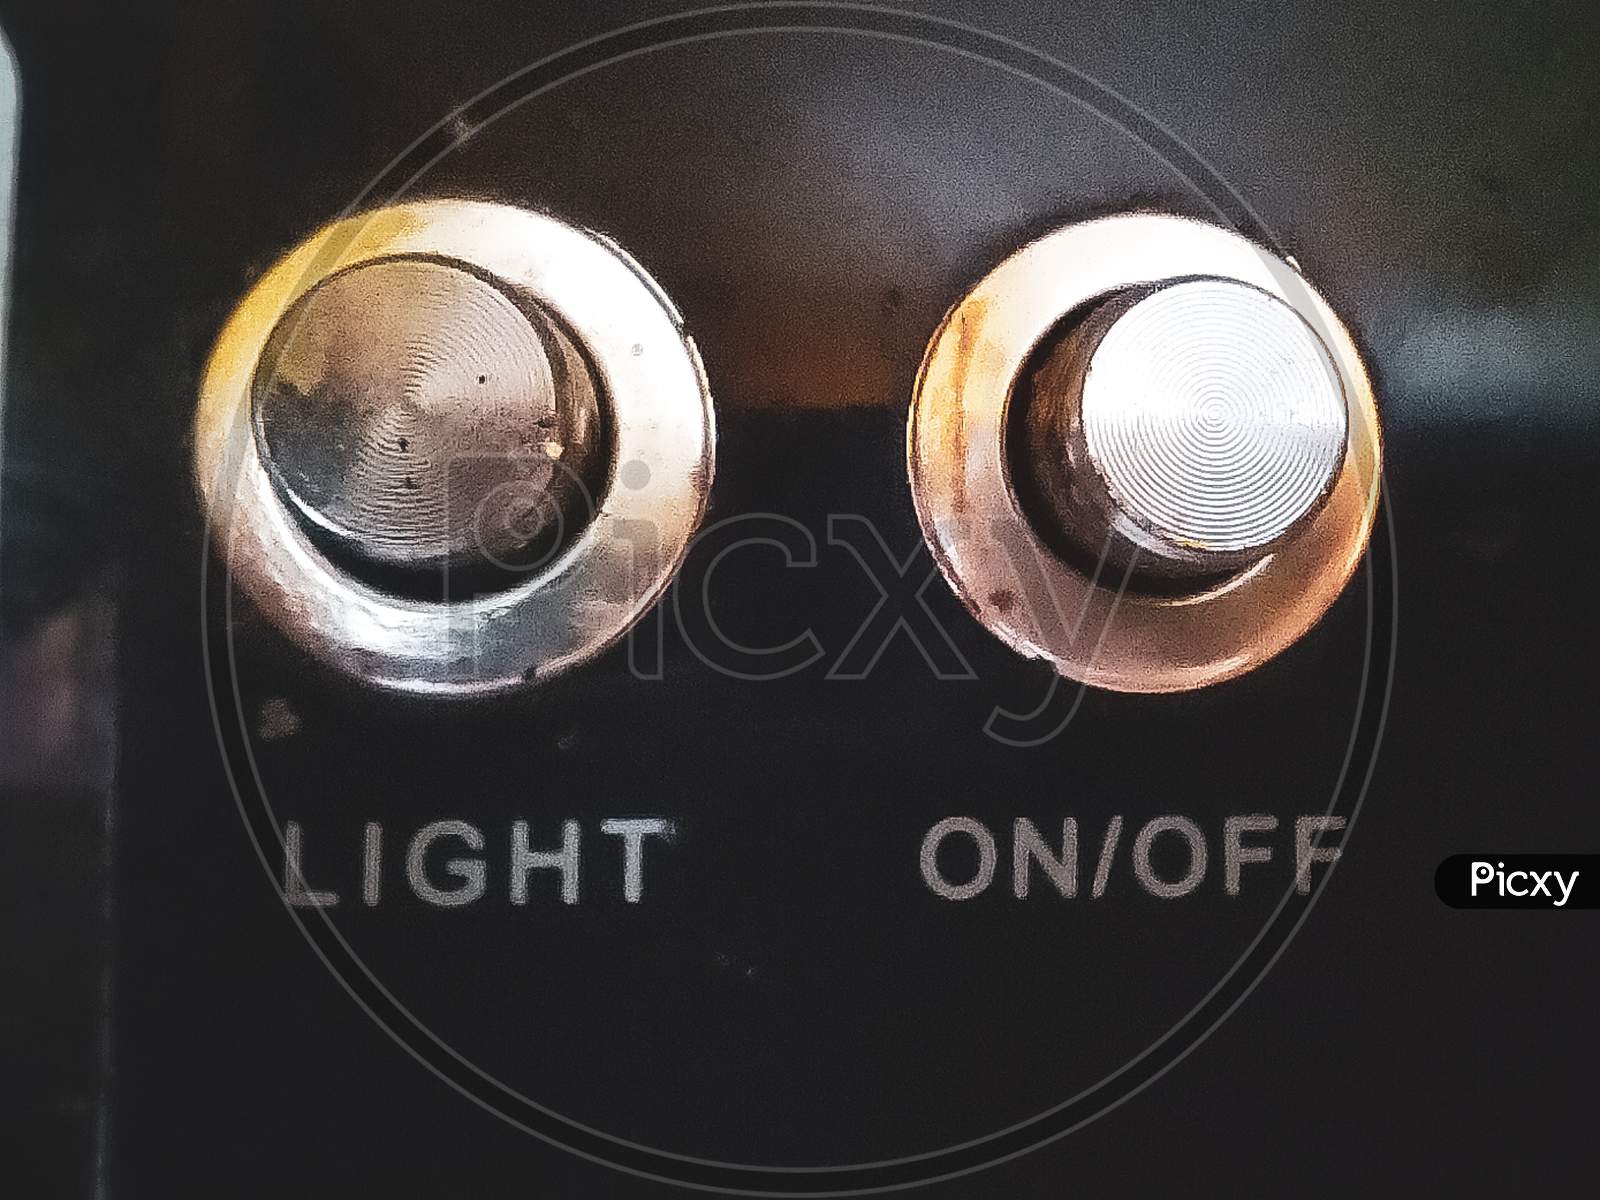 Push Button Of On Off Switch.